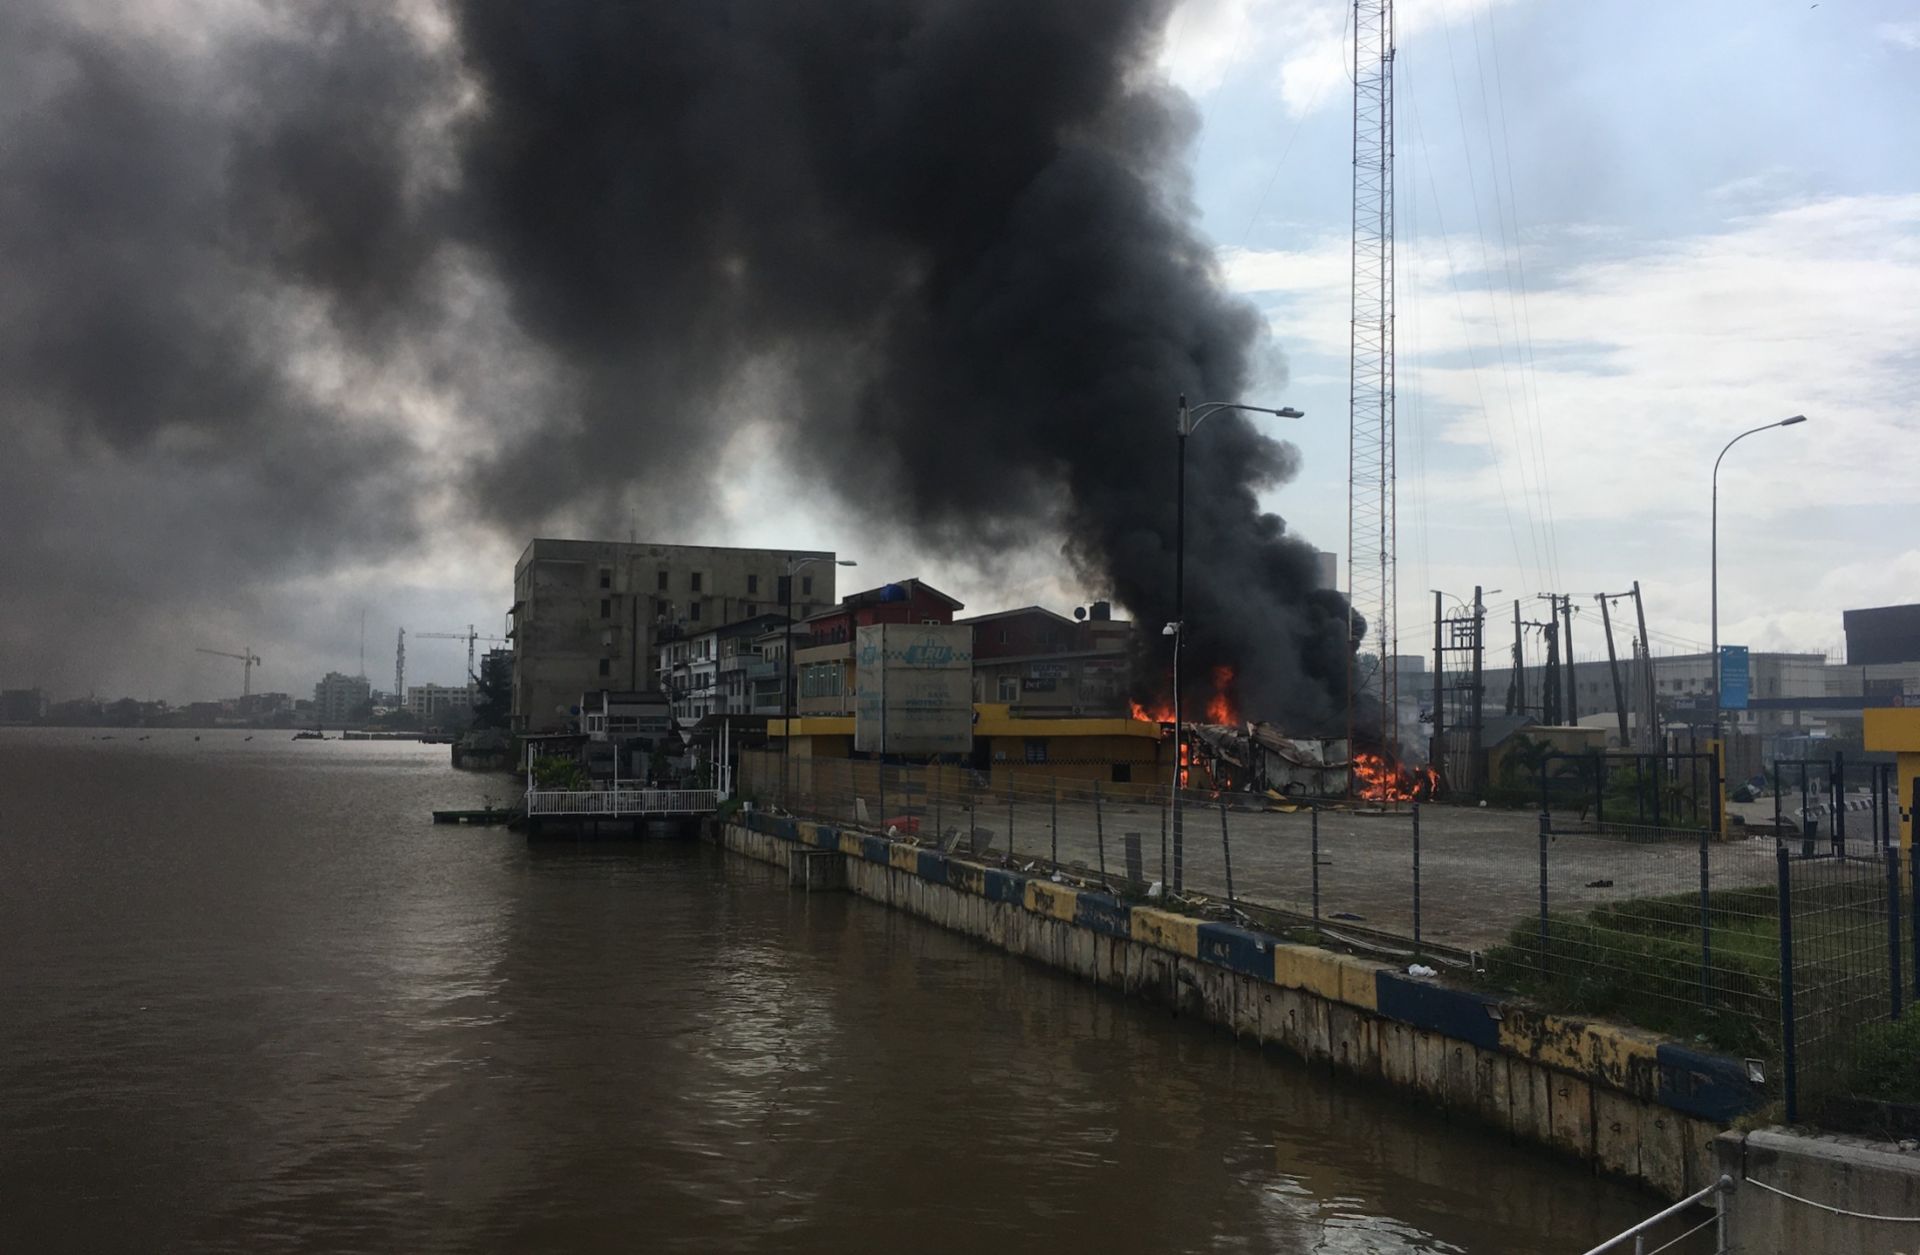 A building remains on fire in Lekki, Nigeria, on Oct. 21, 2020, after #EndSARS protests escalated into violent clashes with police the previous night. 